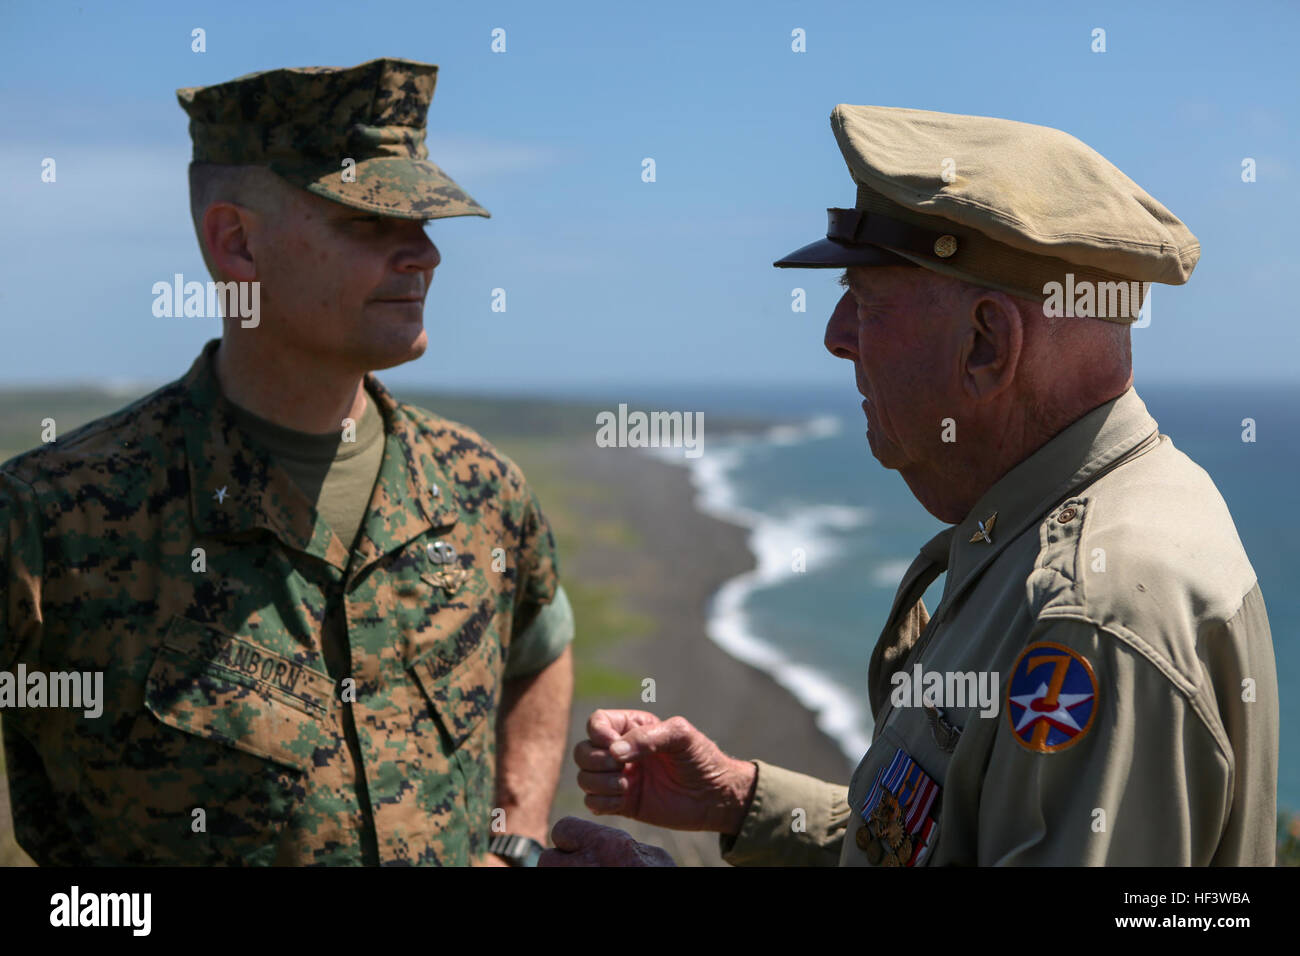 Army Air Corps Capt. Jerry Yellin, right, speaks to Brig. Gen. Russell A. Sanborn commanding general, 1st Marine Aircraft Wing on top of Mount Suribachi at Iwo To, Japan, March 19, 2016. The Iwo Jima Reunion of Honor is an opportunity for Japanese and U.S. veterans and their families, dignitaries, leaders and service members from both nations to honor the battle while recognizing 71 years of peace and prosperity in the U.S. – Japanese alliance. (U.S. Marine Corps photo by MCIPAC Combat Camera Lance Cpl. Juan Esqueda / Released) Iwo Jima 71st Reunion of Honor 160319-M-JD520-071 Stock Photo